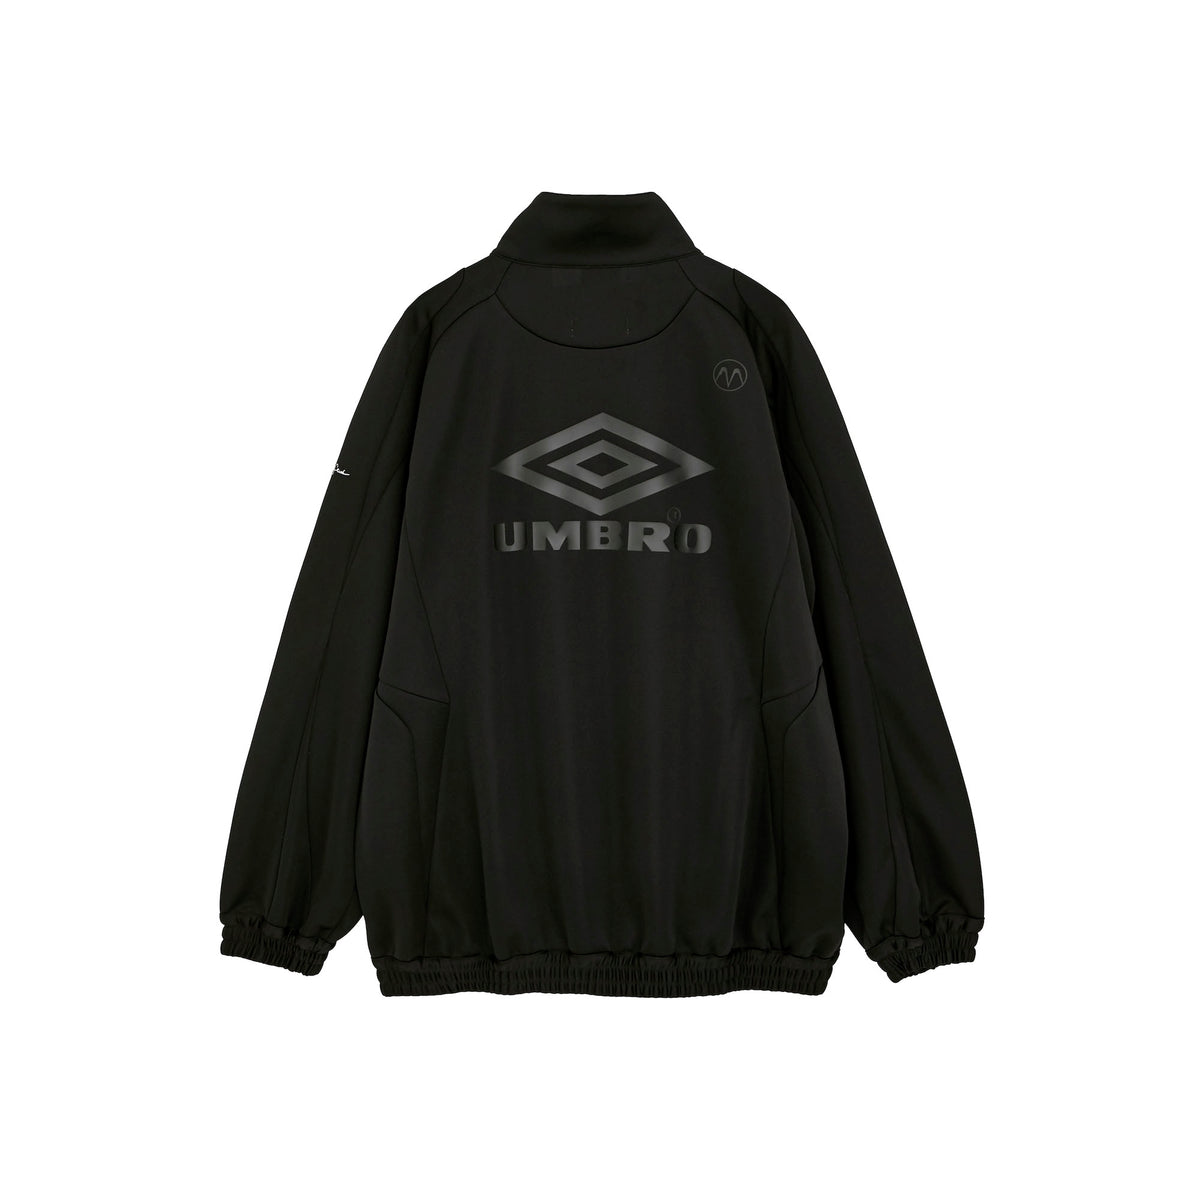 SPECIAL TRAINING JERSEY TOP by UMBRO (BLACK)